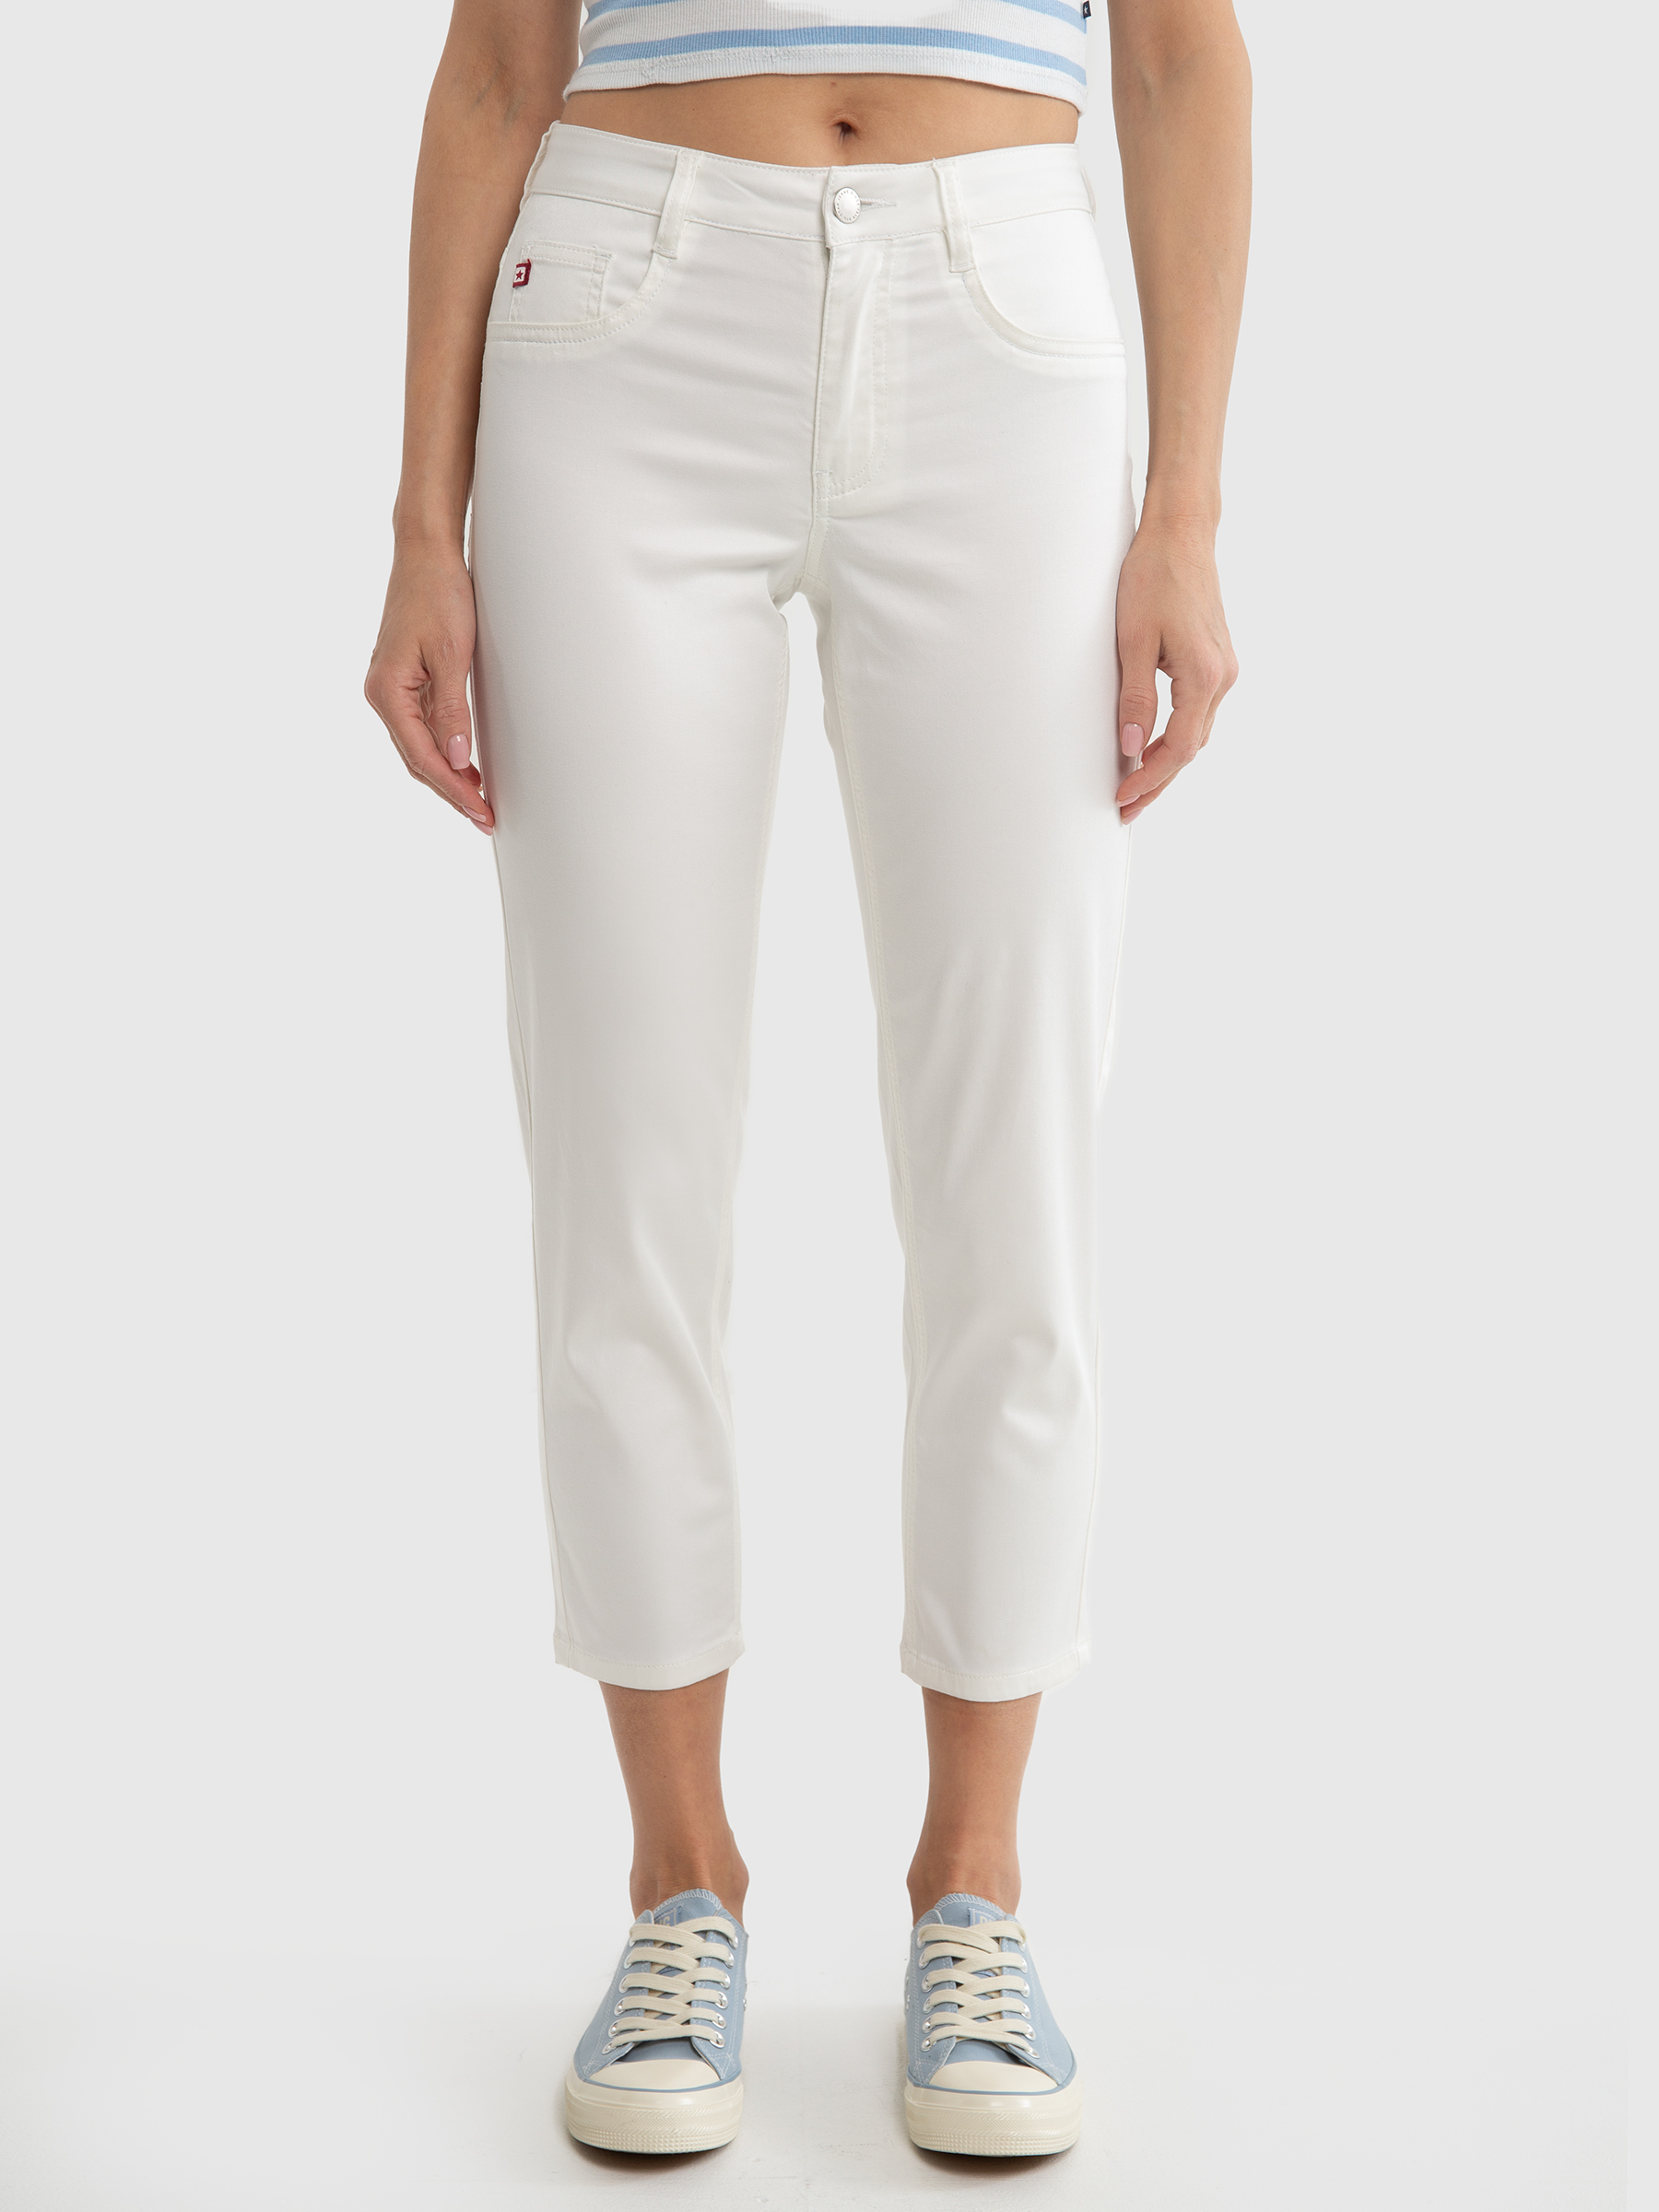 Big Star Woman's Tapered Trousers Non Denim 350011  100